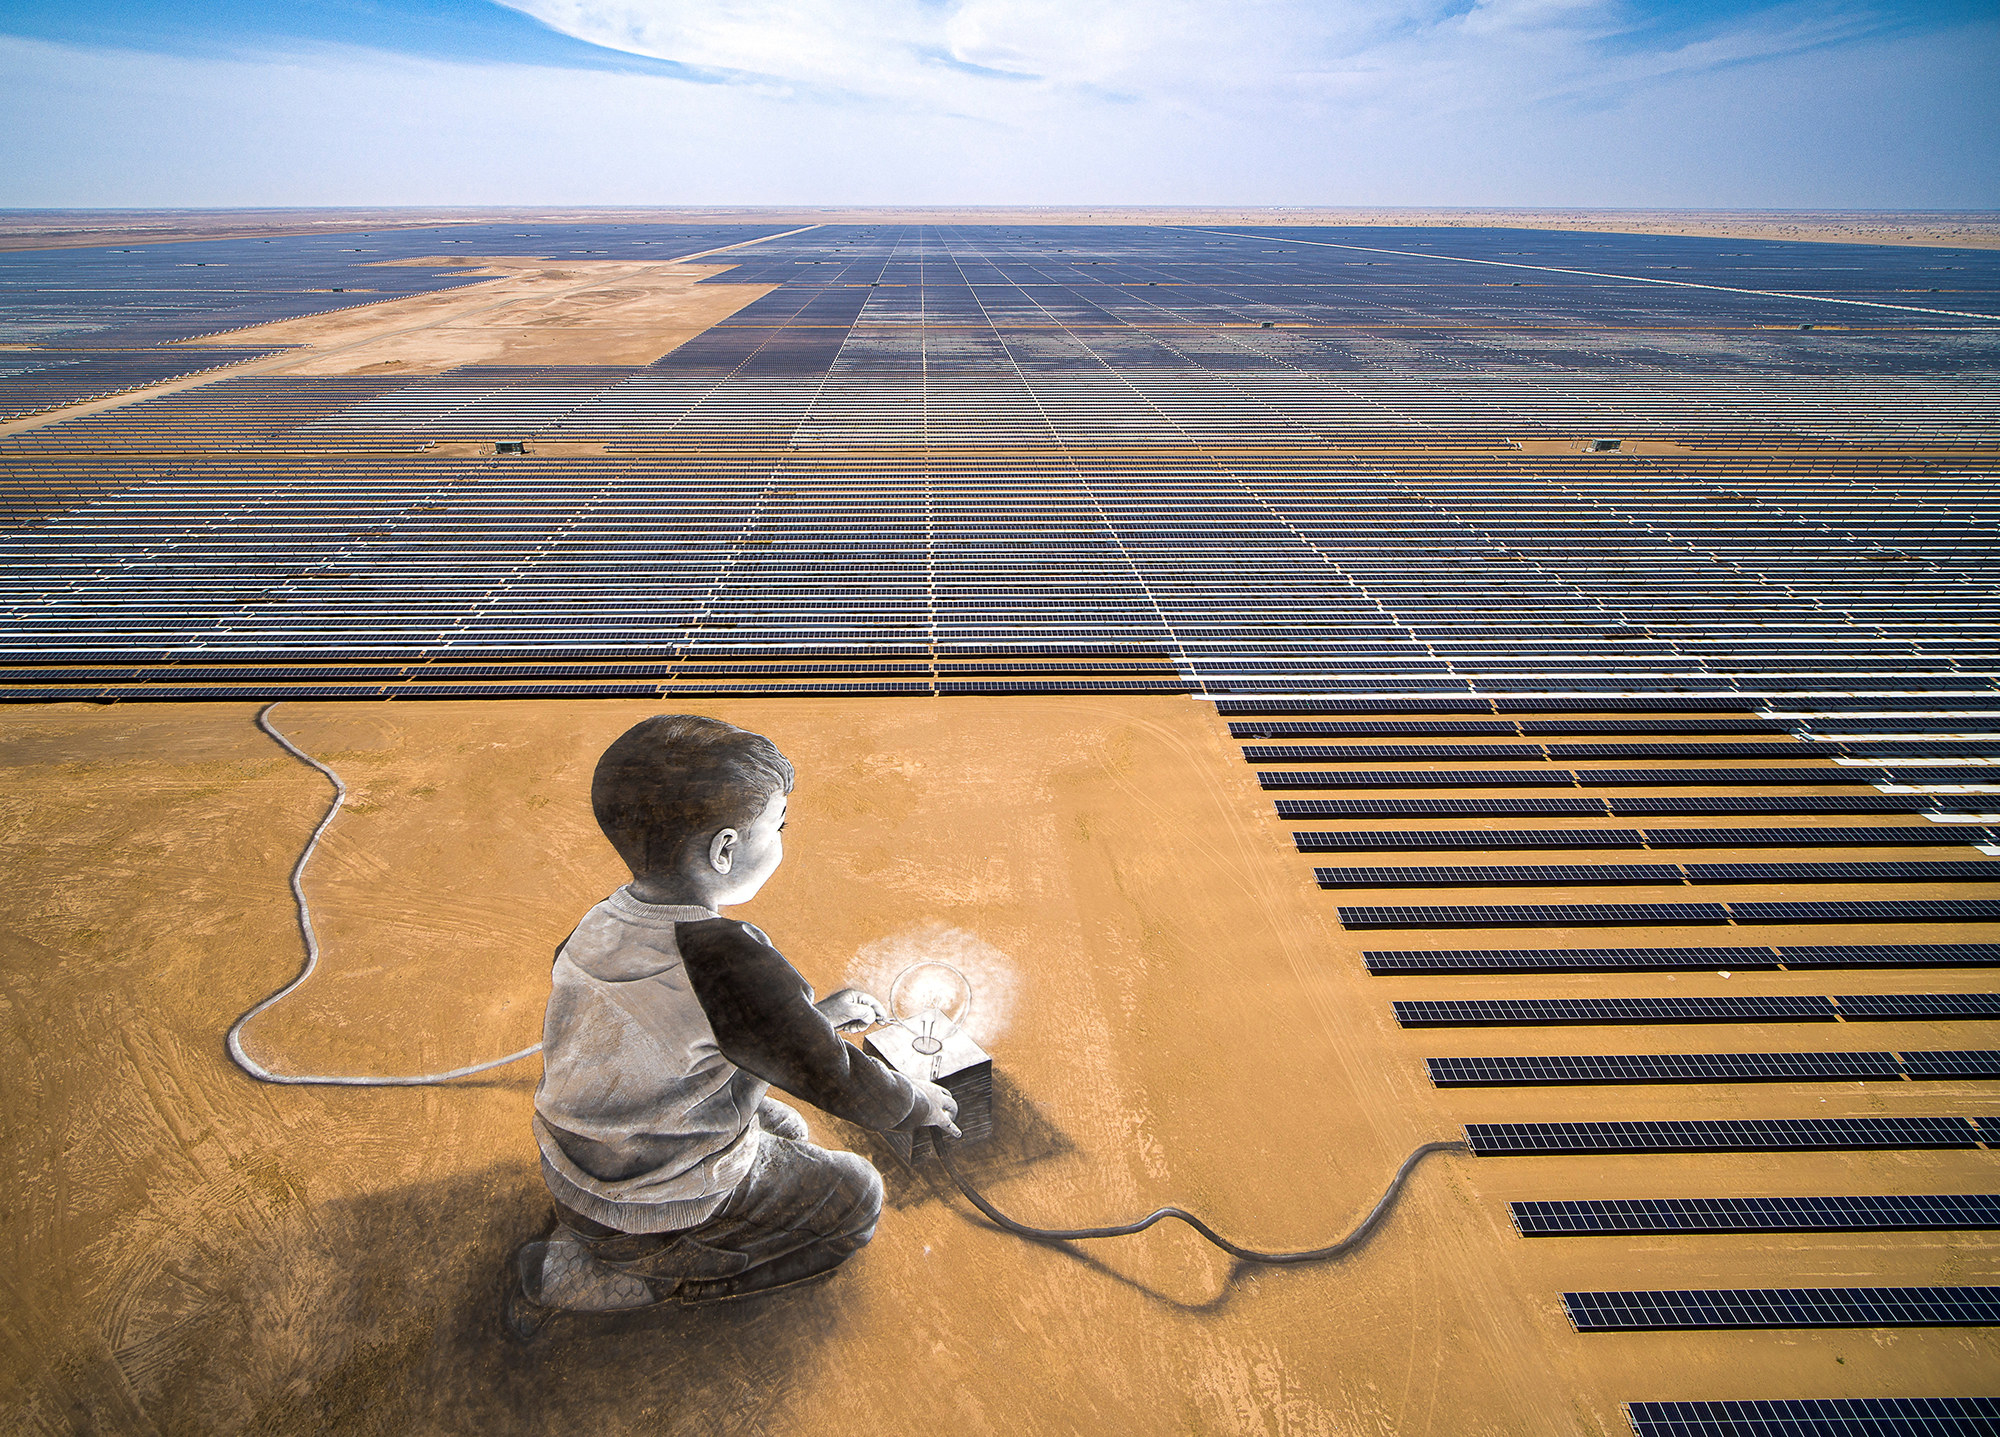 aerial view of a solar power farm in a desert area, in the bottom left there is a painting on the ground of a child and a light bulb